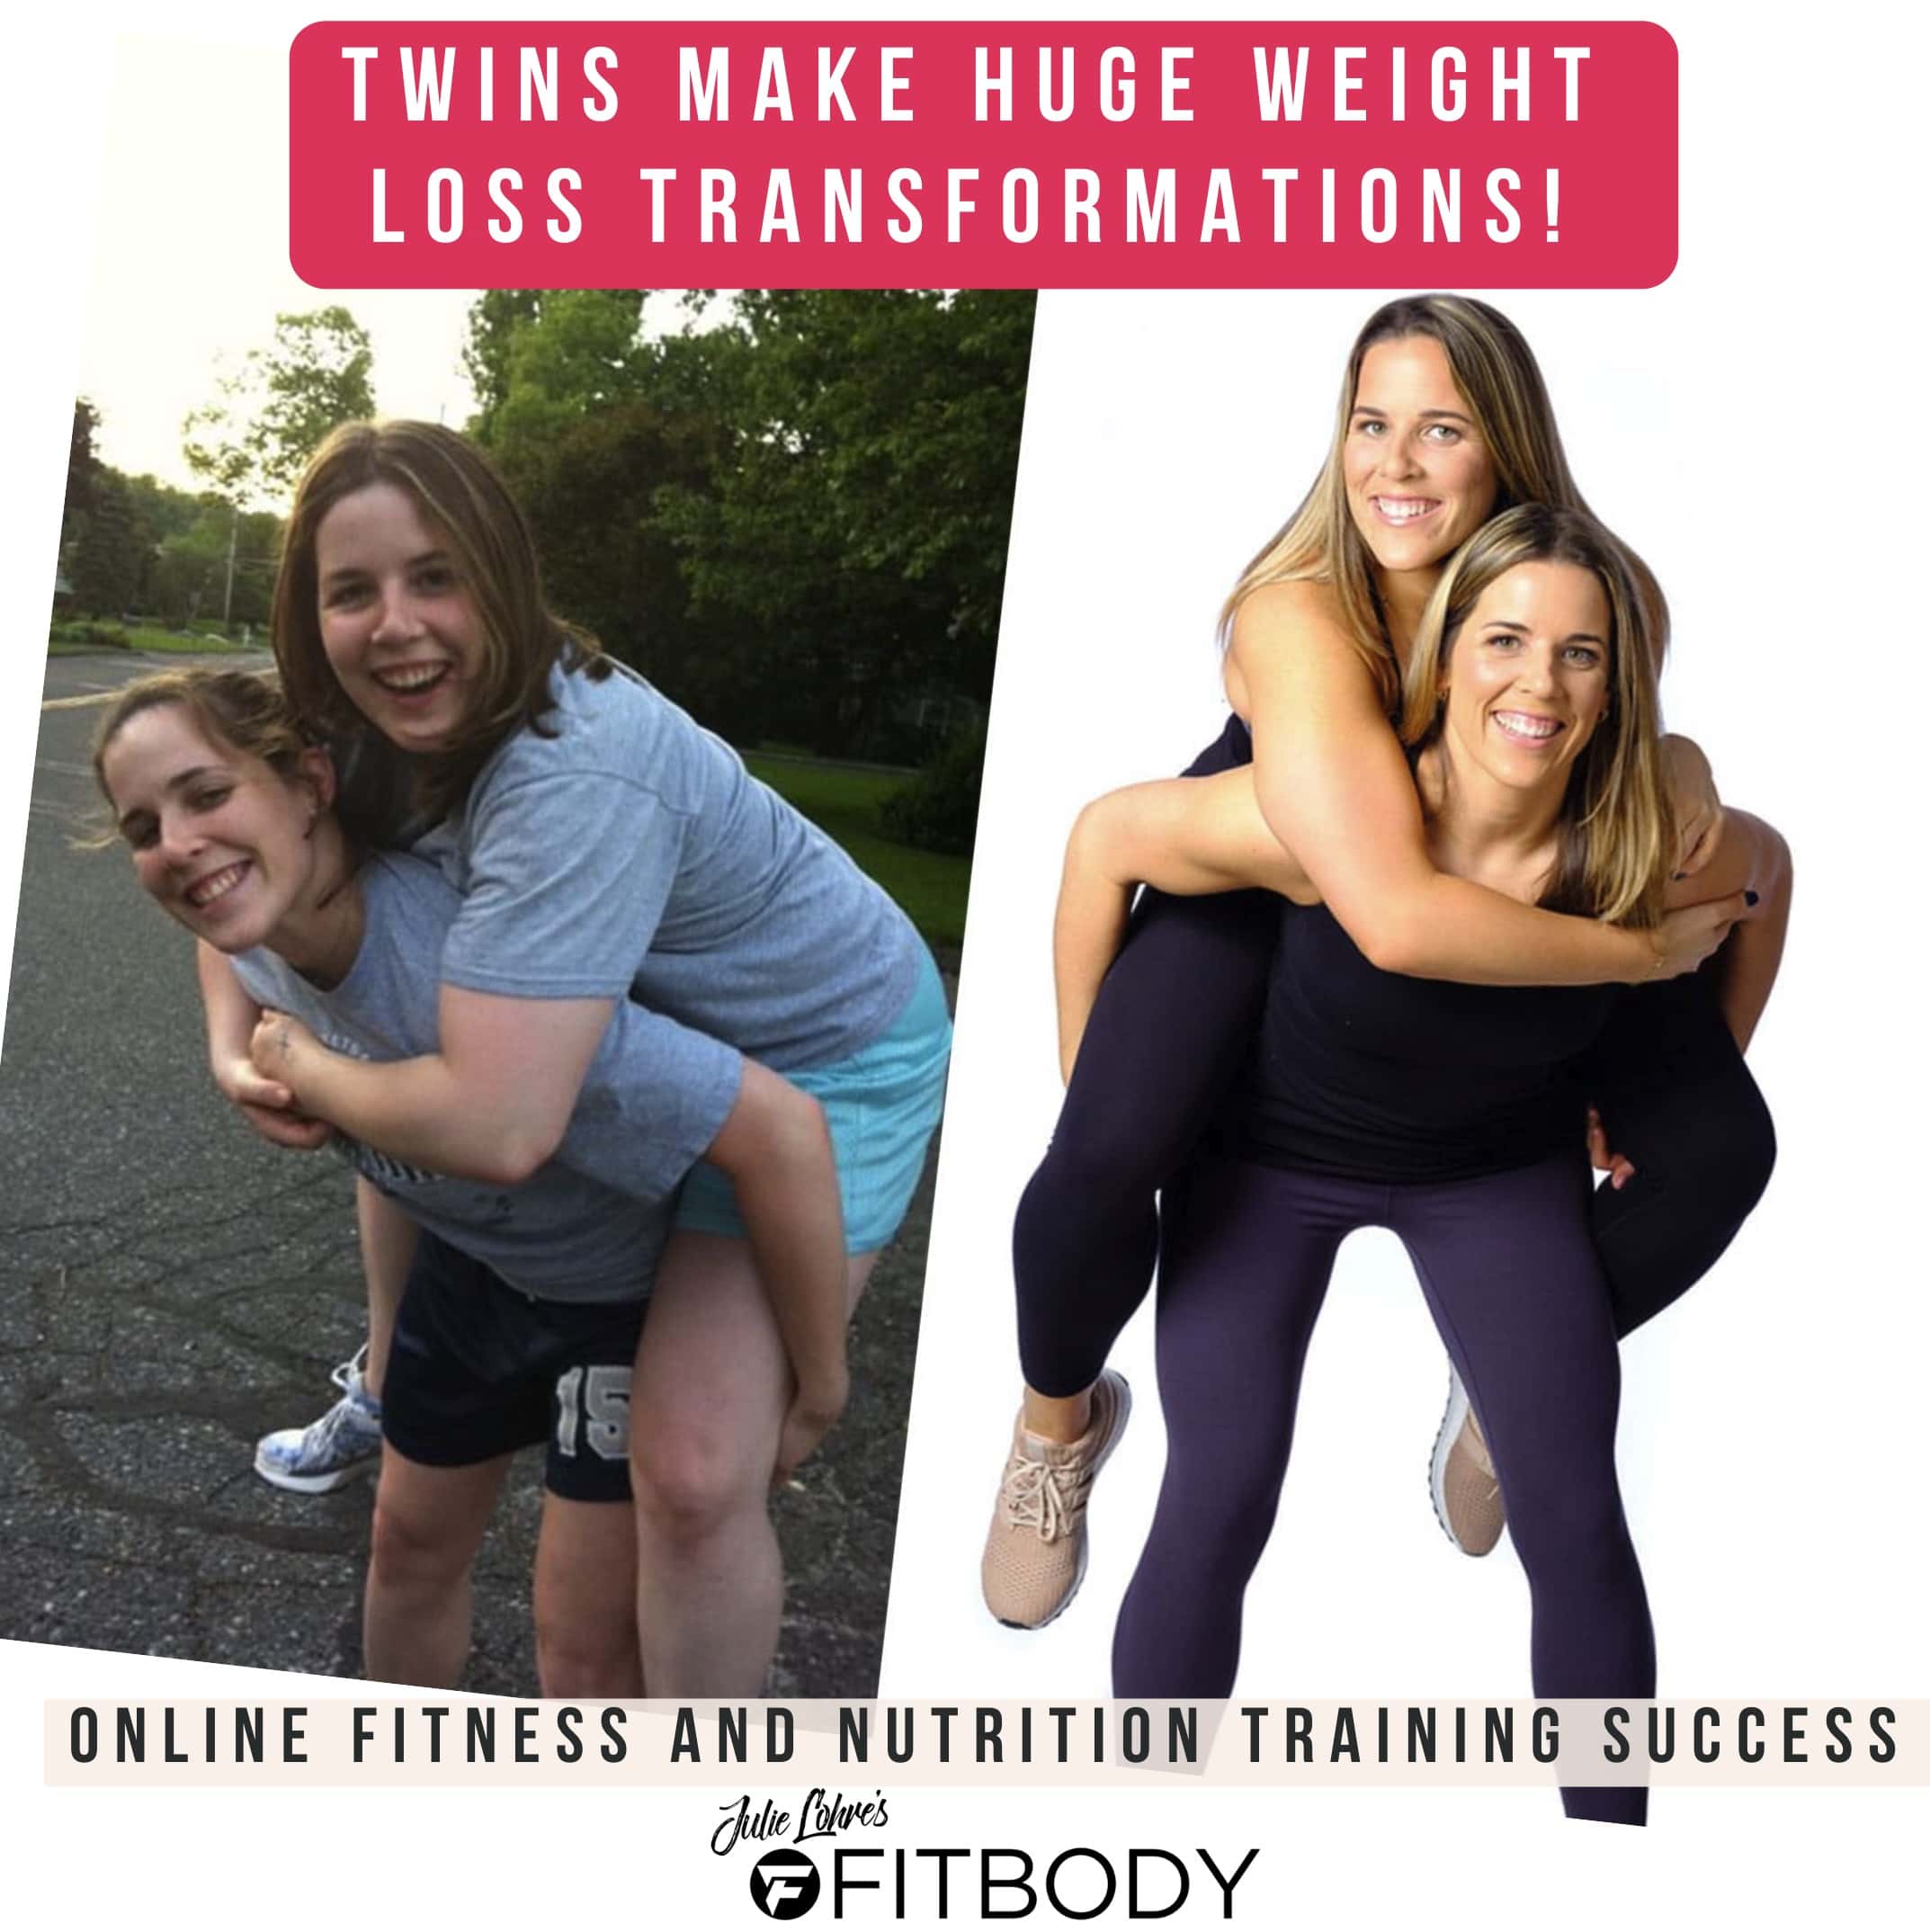 50 lb weight loss transformation twins